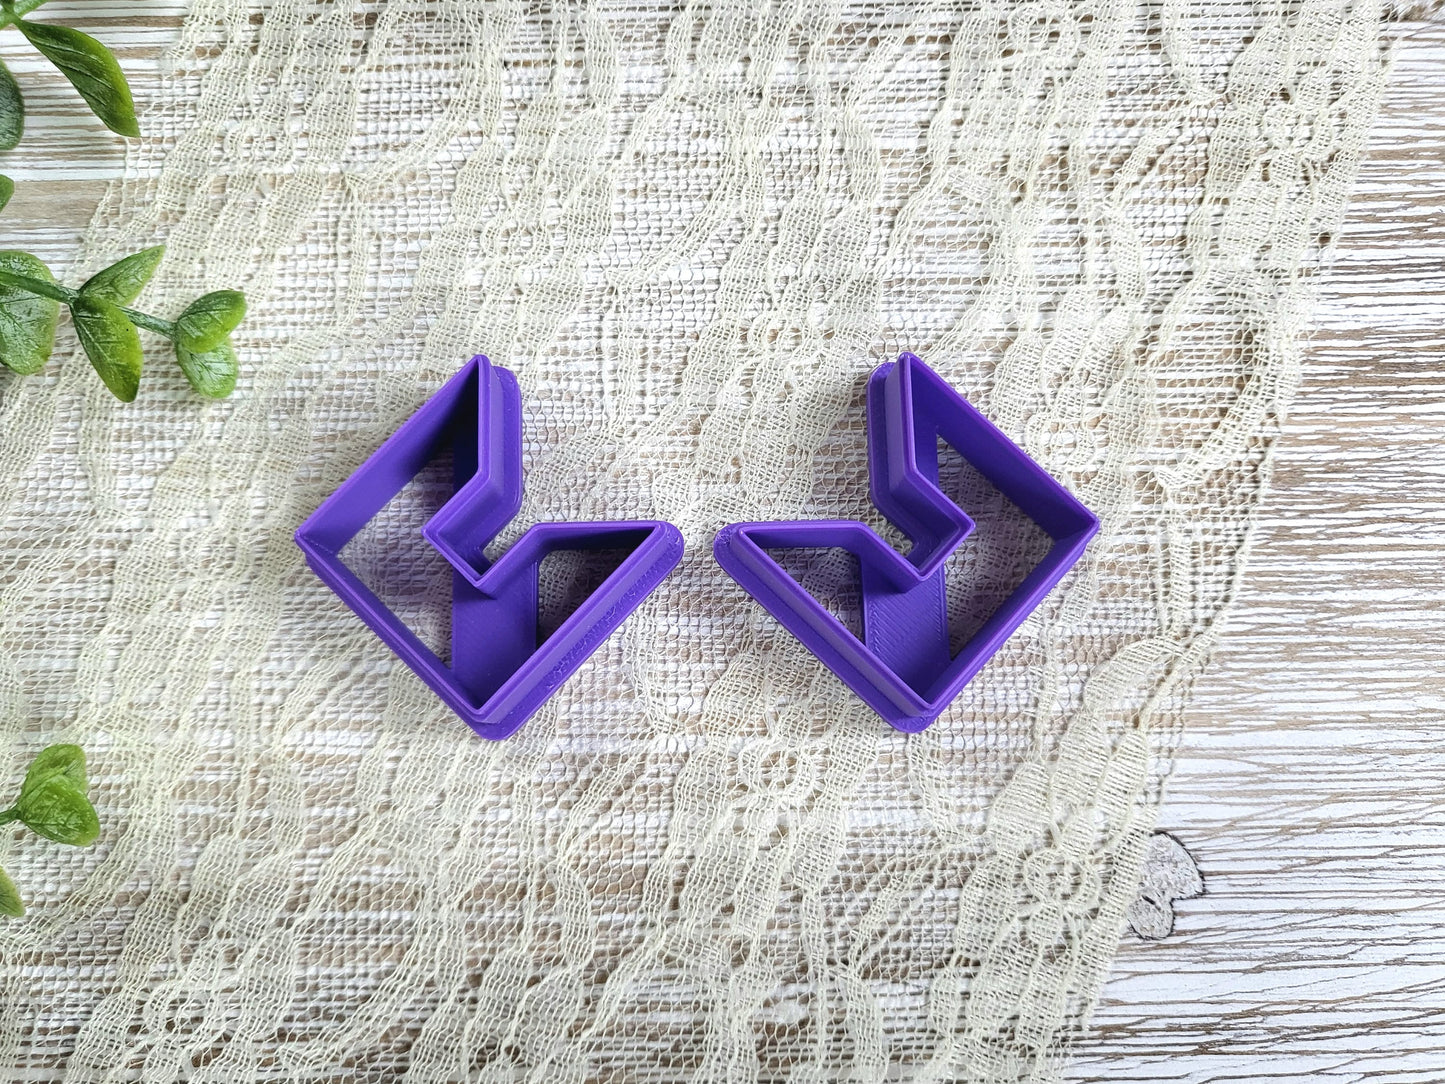 Square Hoop Clay Cutter, Polymer Clay Cutters, Earring Jewelry Making, Hoop Making Clay Cutter, Hoop Clay Cutter